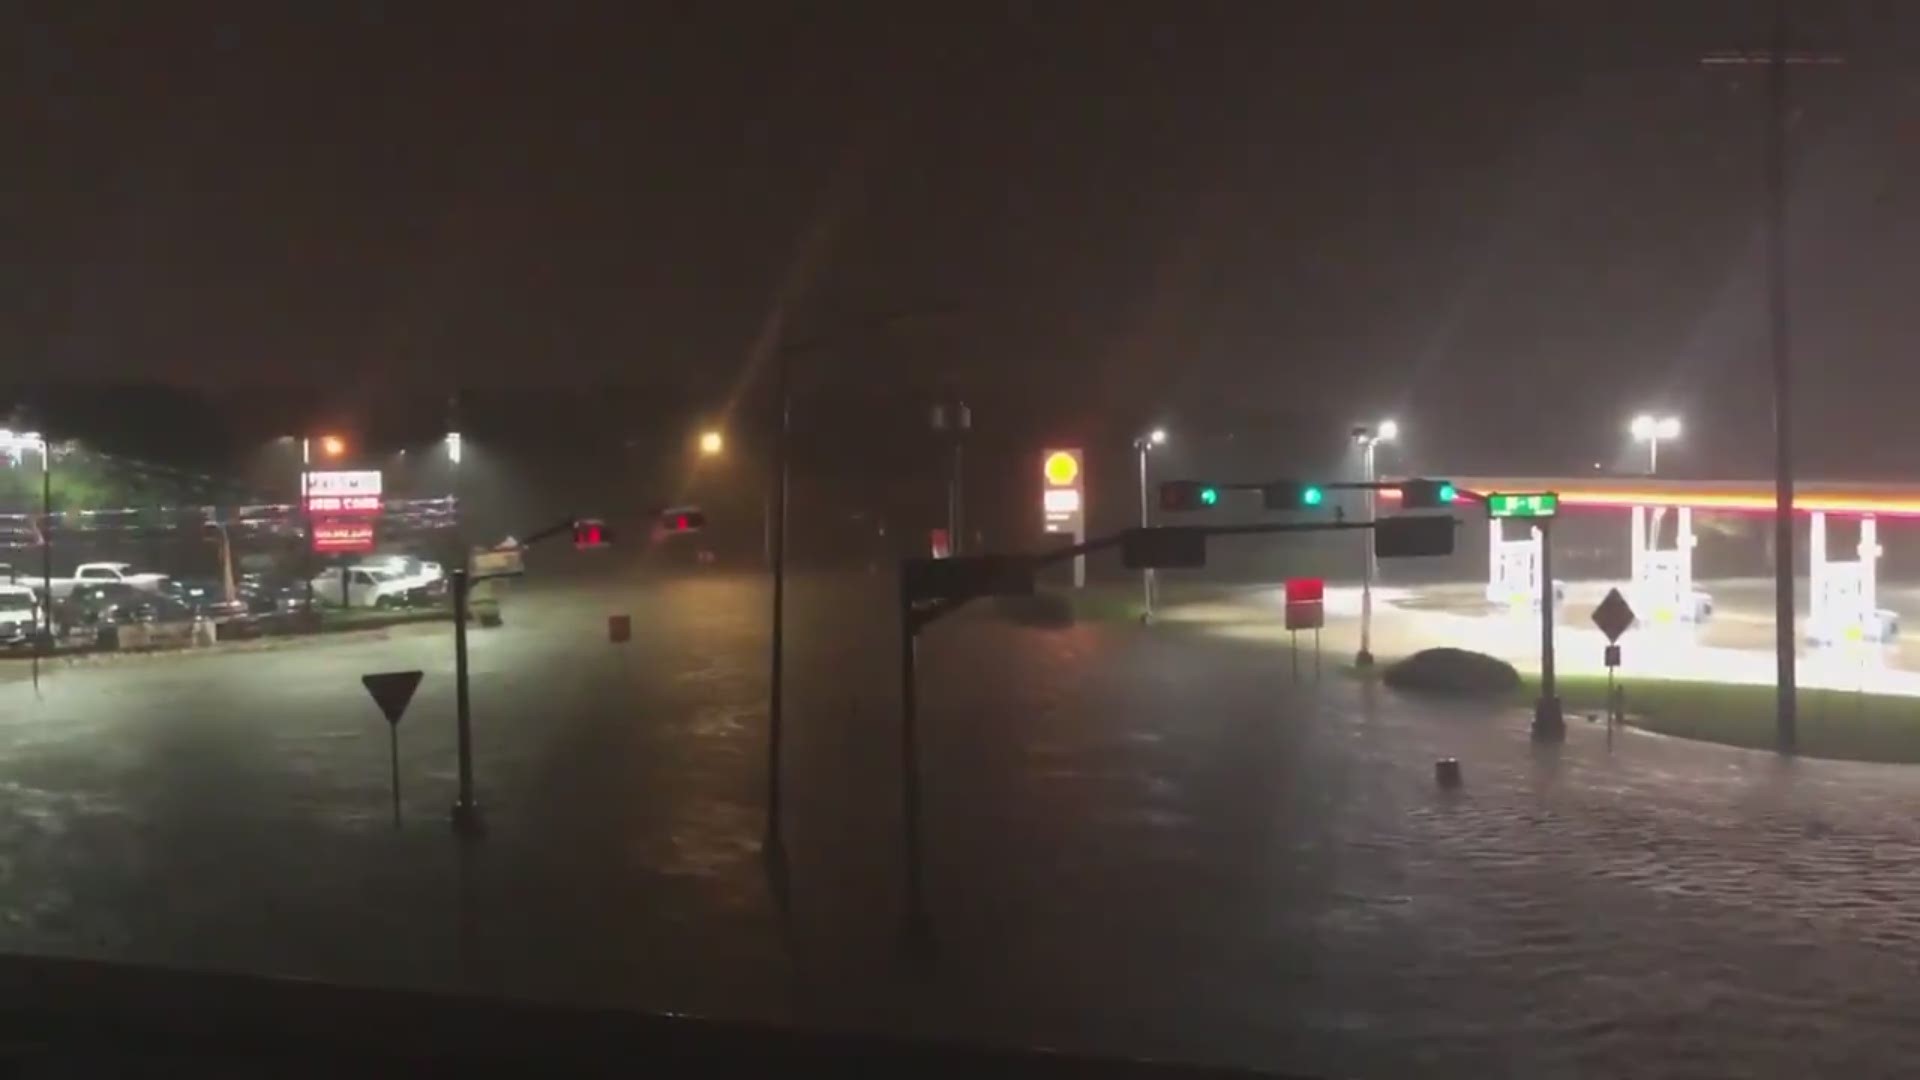 Severe weather floods the intersection of Washington Boulevard and Interstate 10 in Beaumont, Texas.